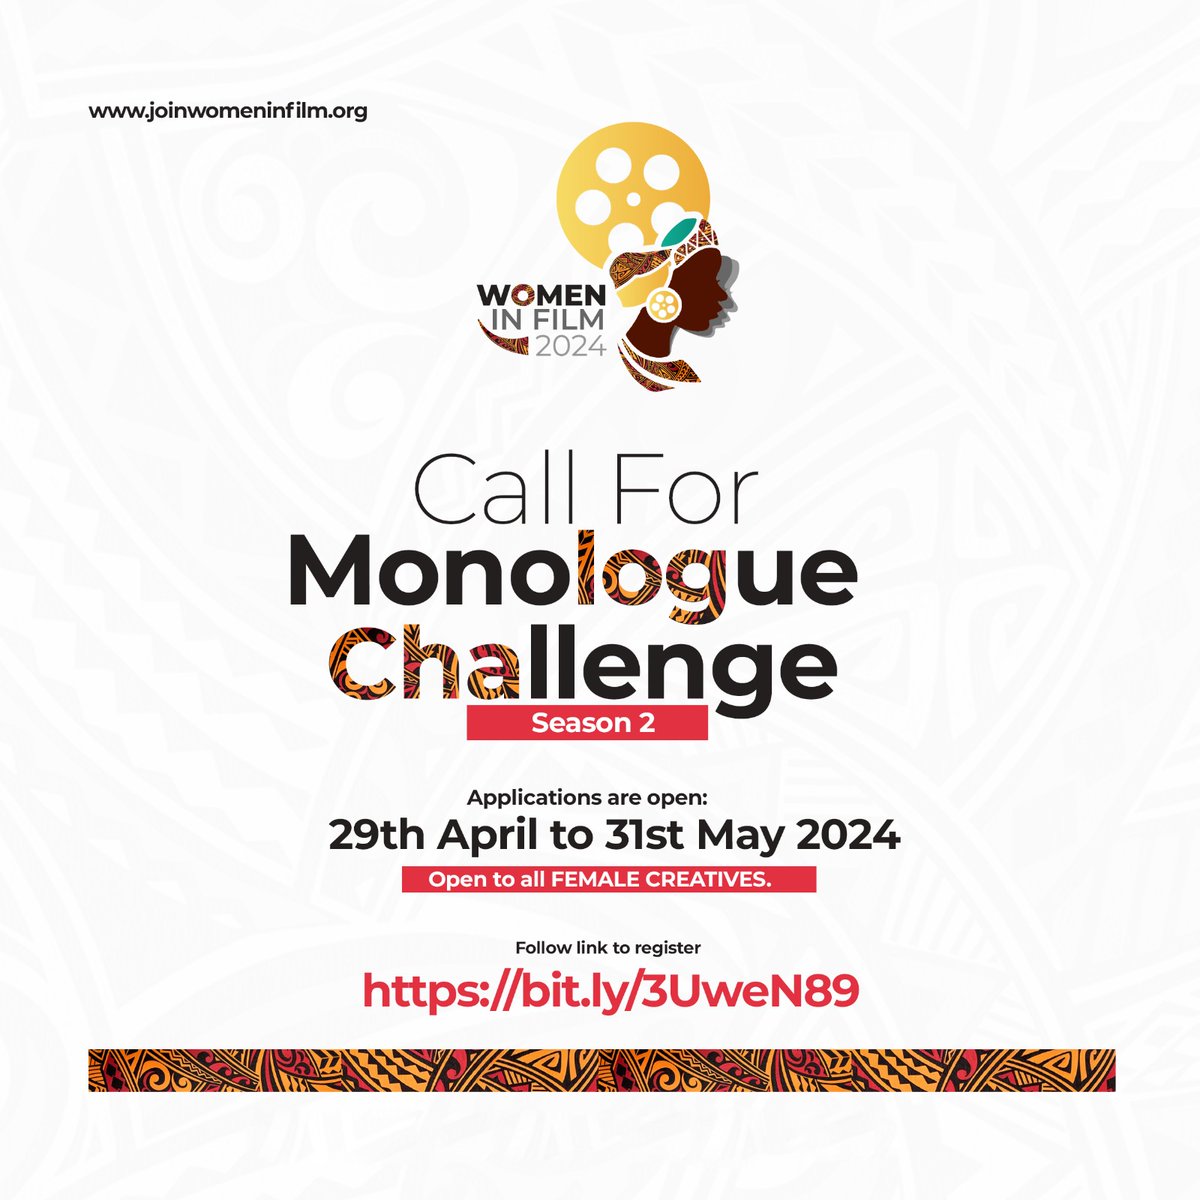 Women In Film Monologue Challenge Season 2 is here Bigger and Better.
Are you ready to showcase your talent and creativity to the world? Whether you're a seasoned Actress or starting out, This is your chance to share your unique talent and vision.
 bit.ly/3UweN89